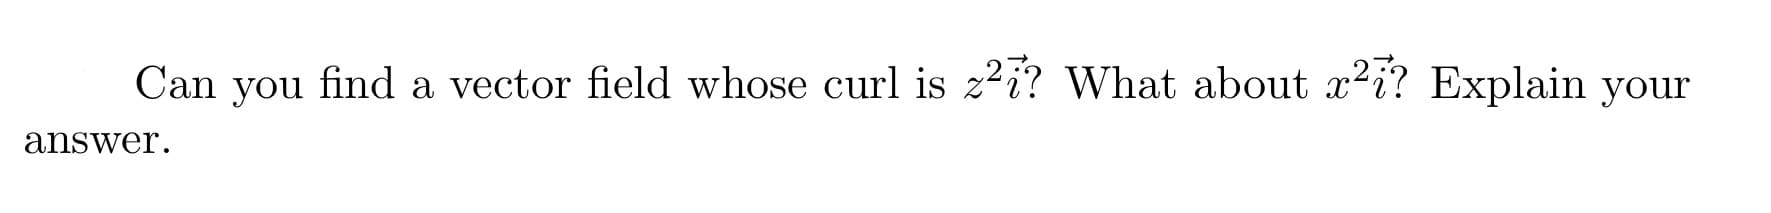 Can you find a vector field whose curl is z?i? What about x2i? Explain your
answer.
